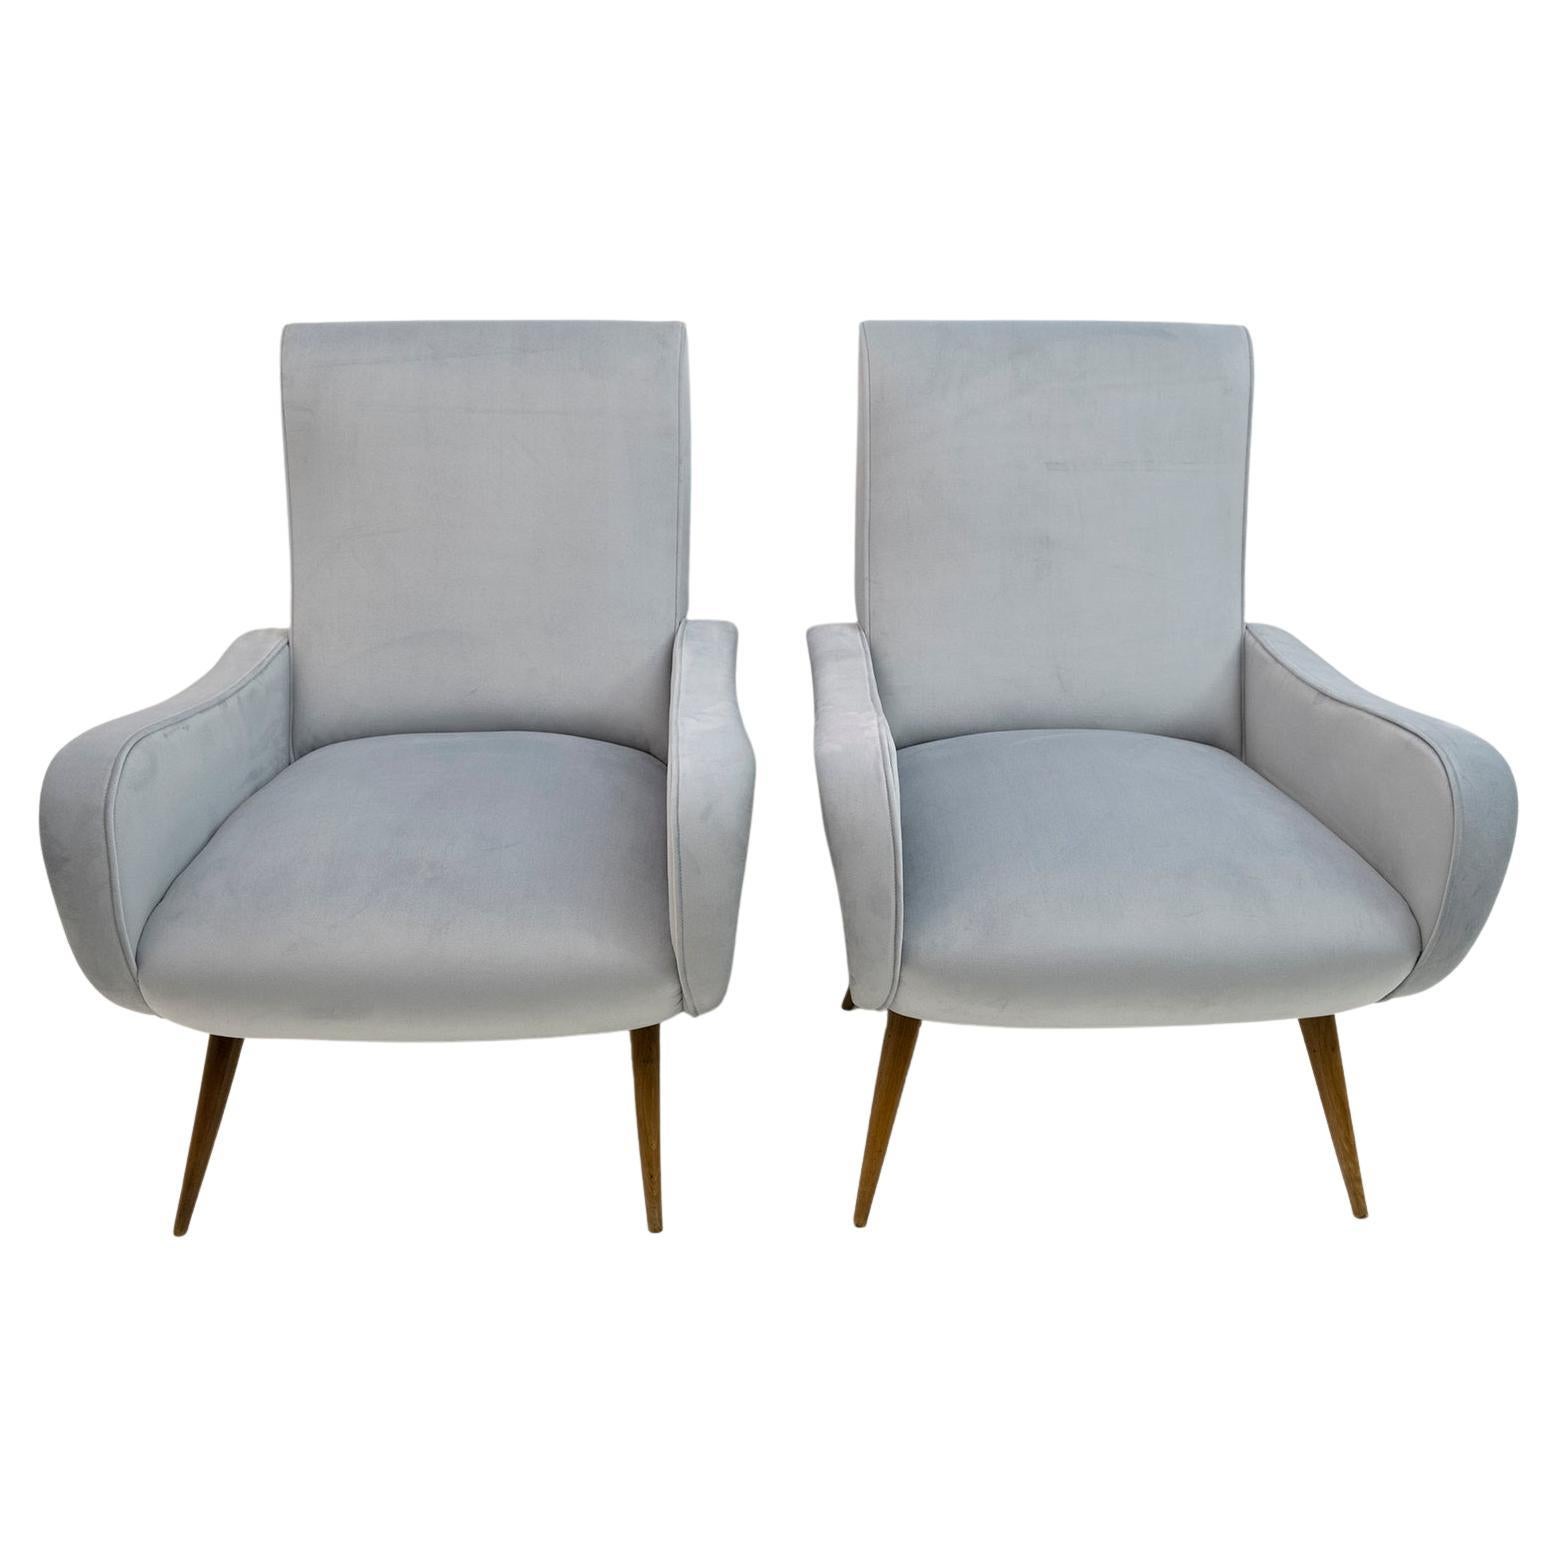 Pair of After Marco Zanuso Mid-century Modern Velvet Armchairs "Lady", 50s